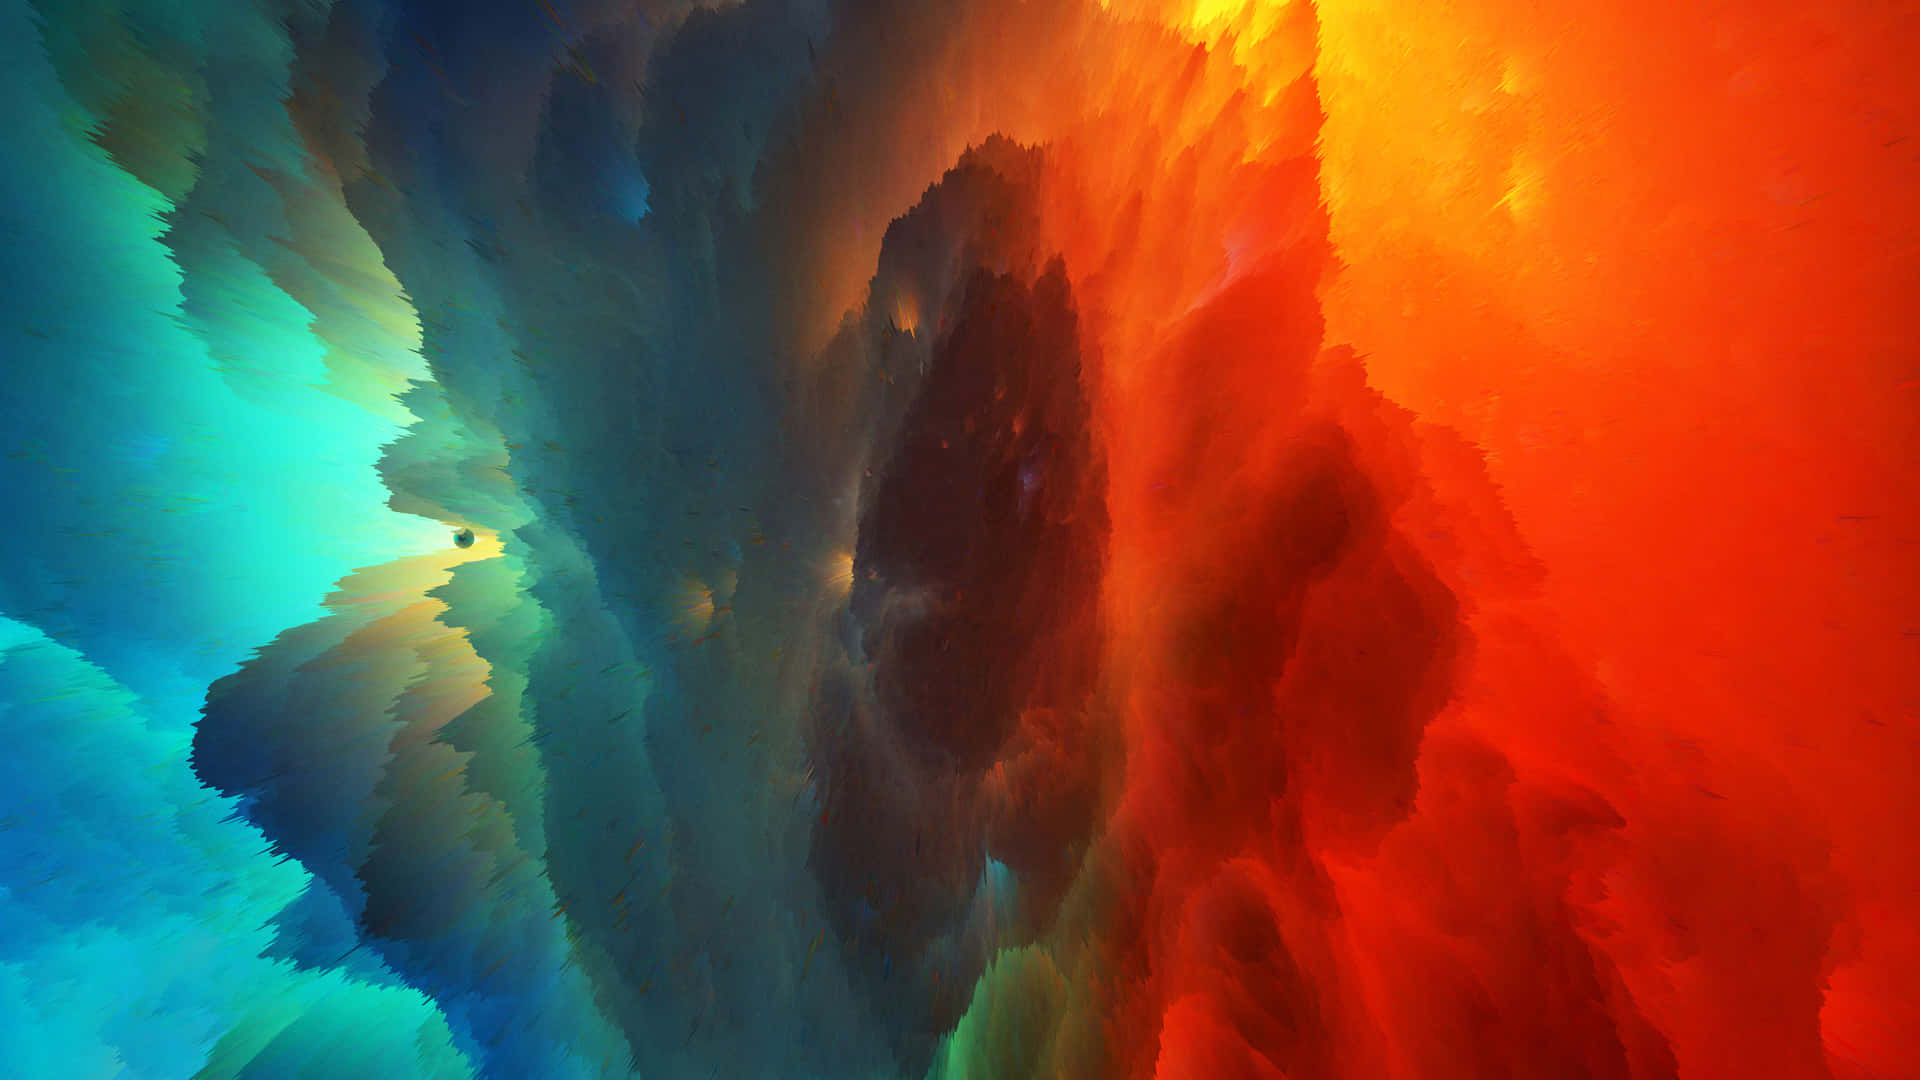 Cosmic Colorful Abstract 4k Wallpaper